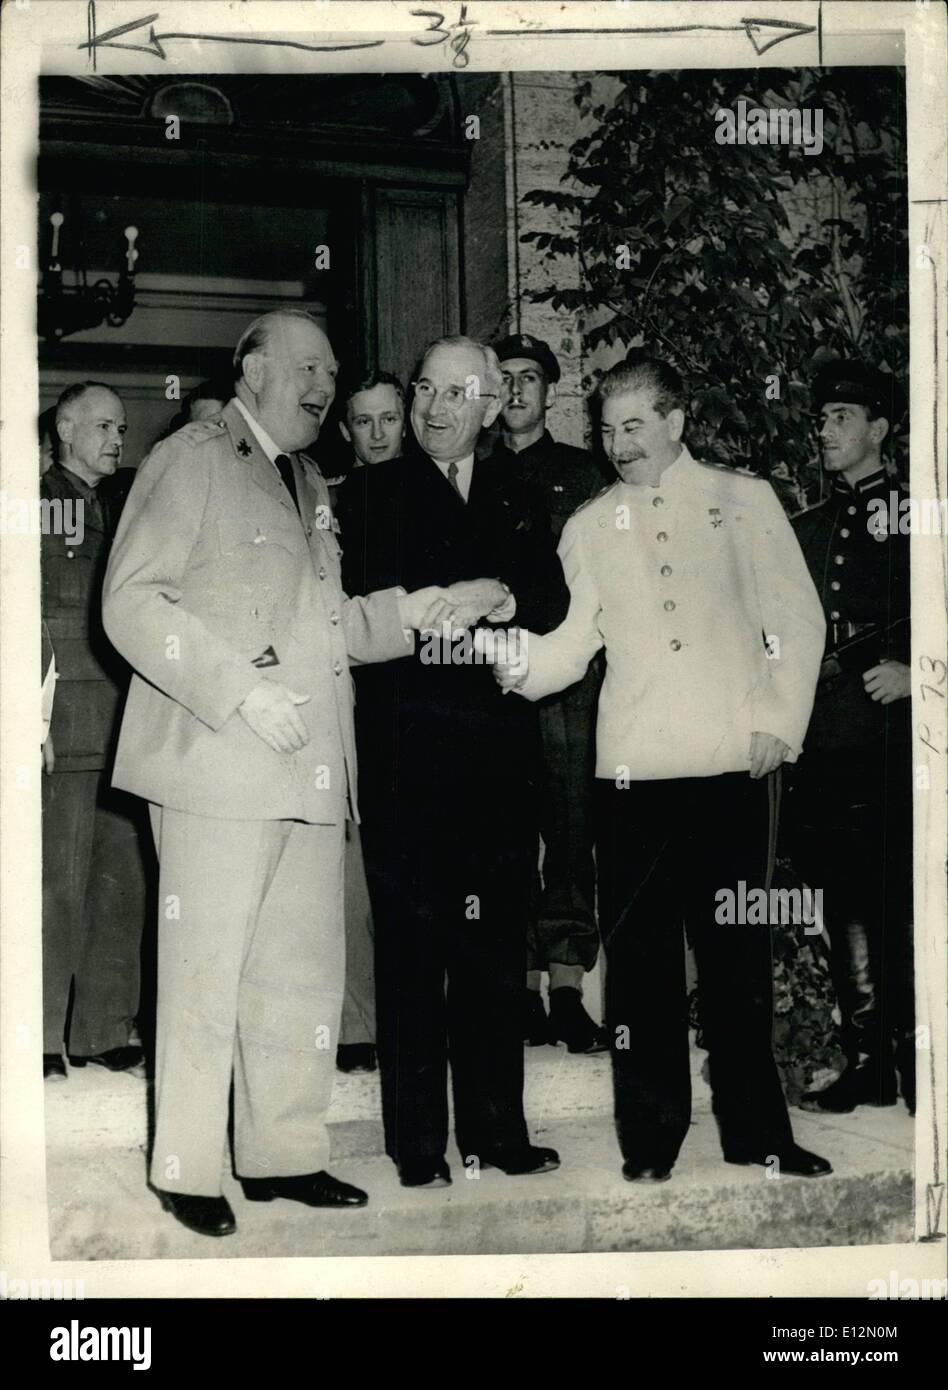 Feb. 24, 2012 - Sir Winston celebrates his 90th birthday. Sir Winston Churchill celebrates his 90th birthday on Monday 30th November 1964. Photo Shows: Triple handshake for the Big Three after the Potsdam Conference: L-R: Winston Churchill, Pres. Truman and Marshal Stalin. Stock Photo